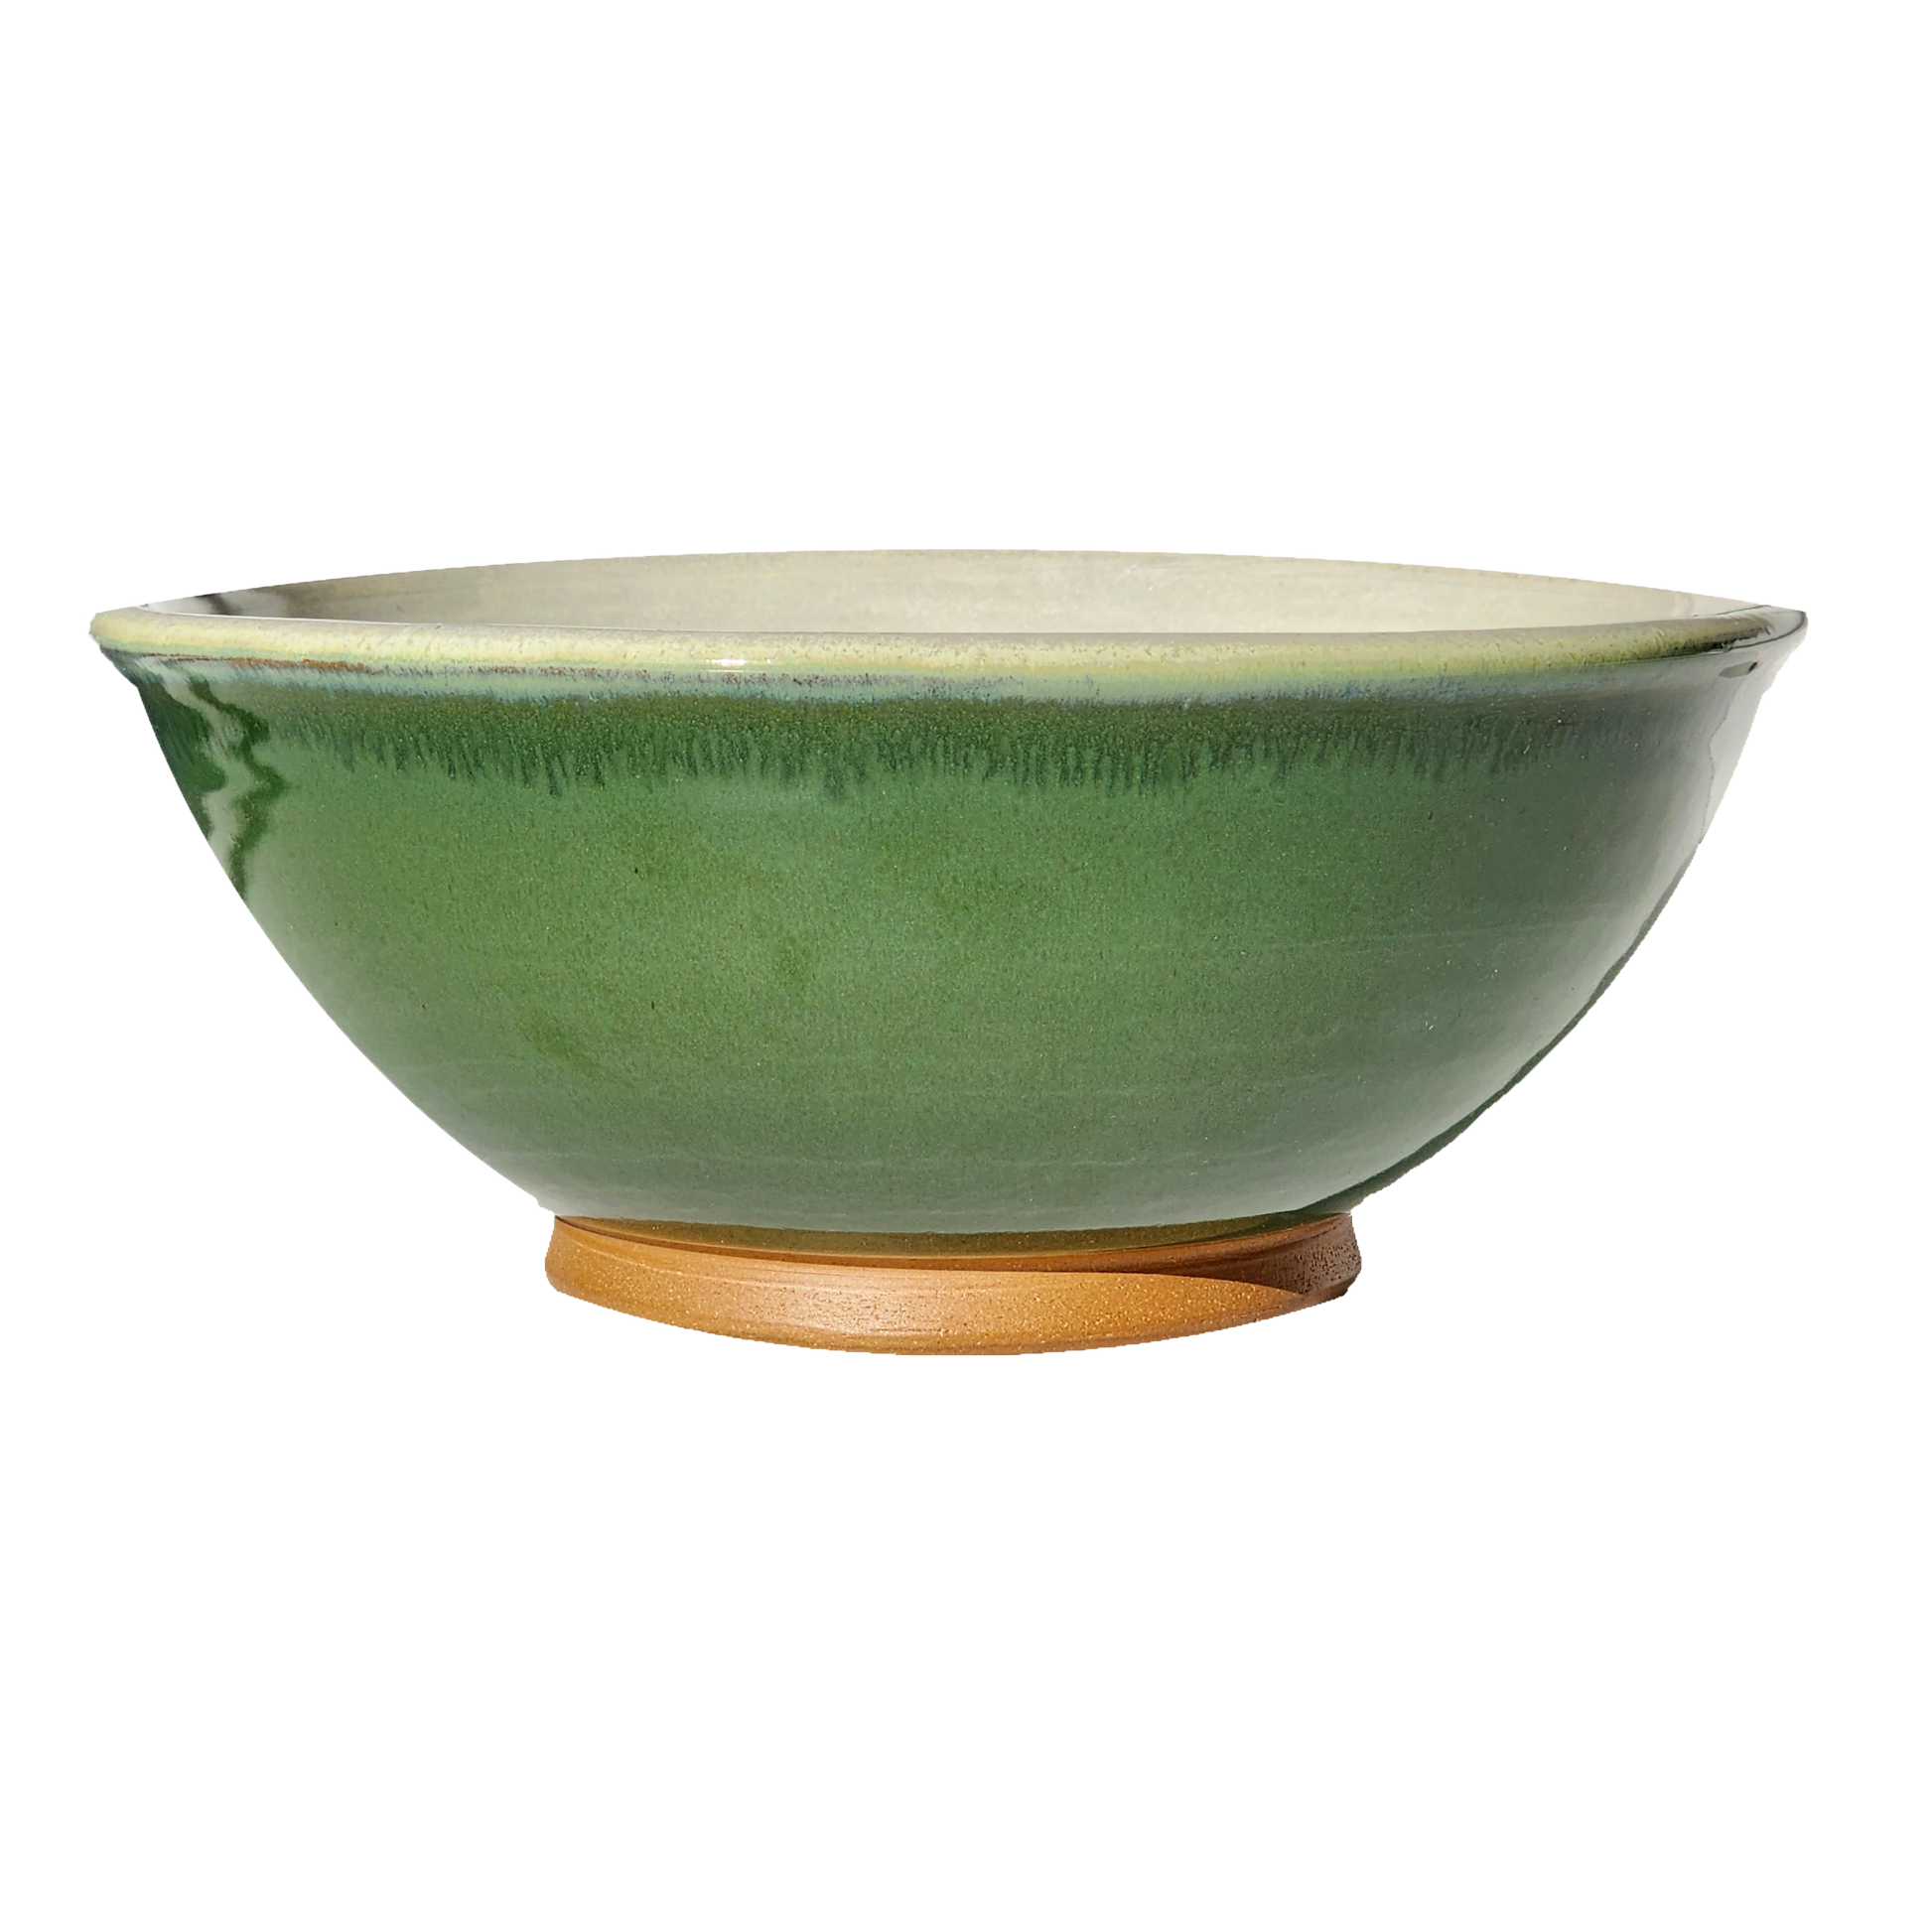 Image: A large mixing bowl in rich dark green, offering plenty of room with a capacity of 12.5 cups. Bring the beauty of nature into your kitchen while preparing delicious meals.